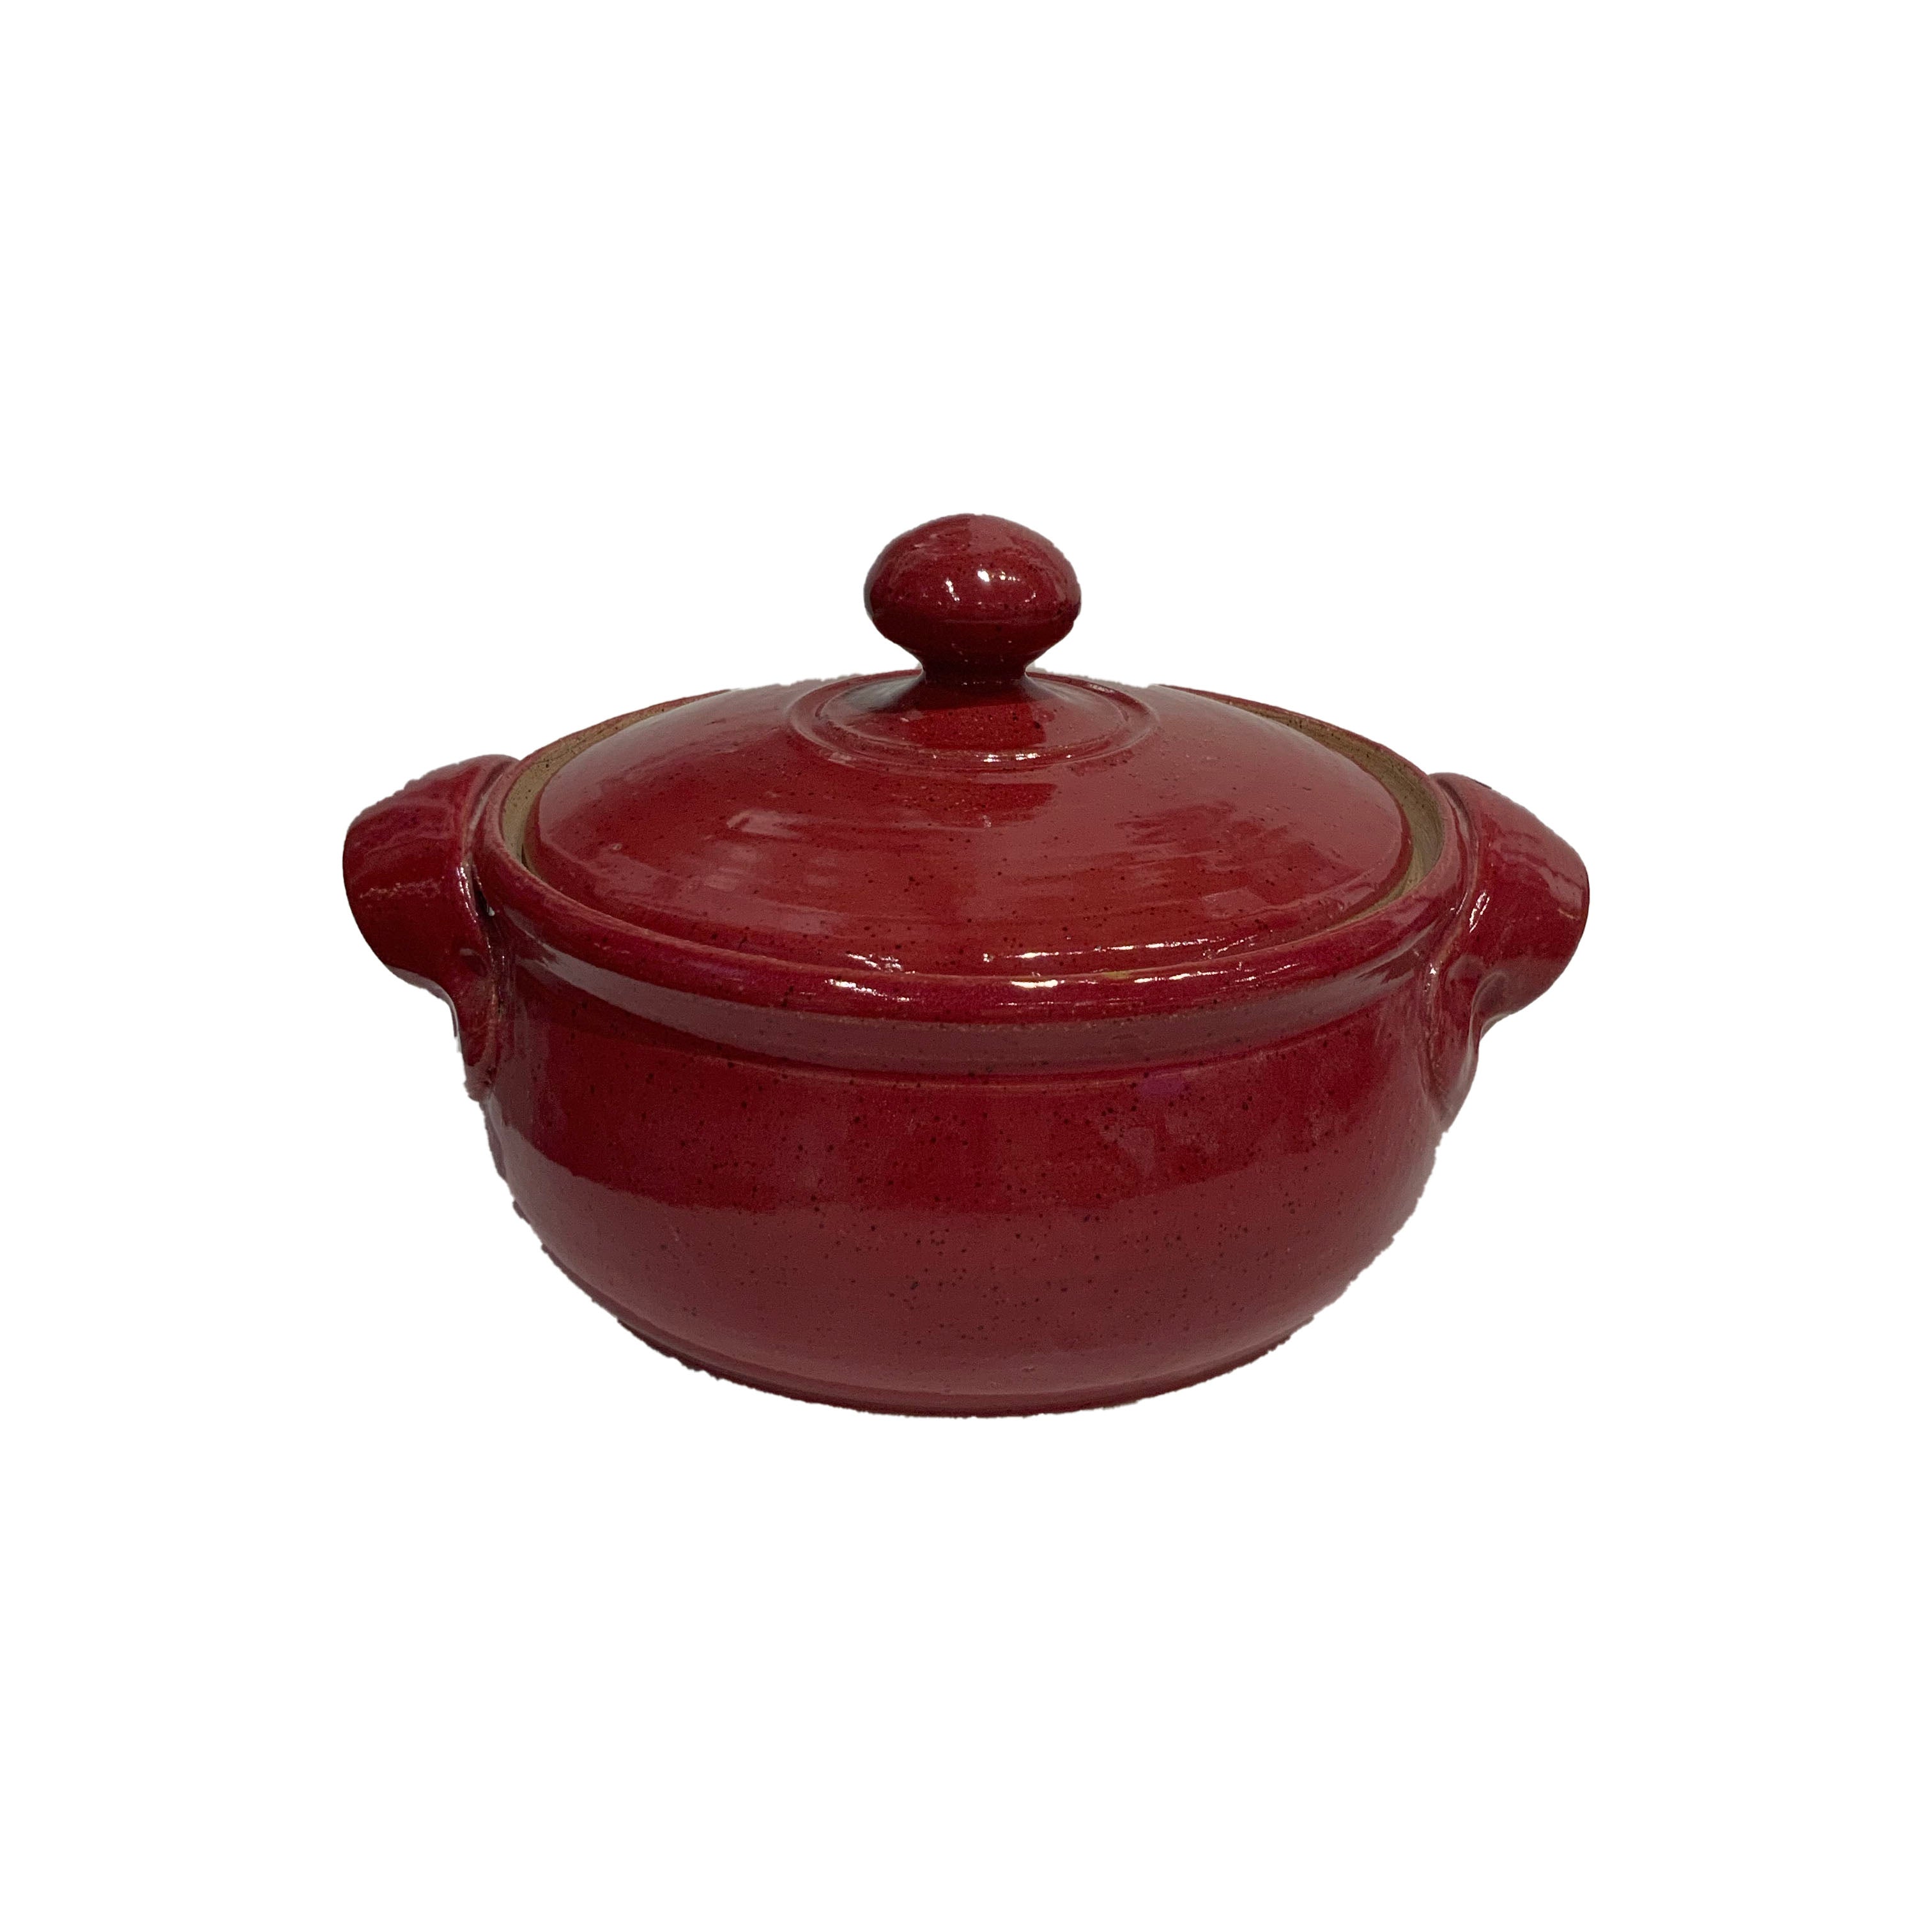 SMALL DUTCH OVEN DISH -SPECKLED RED